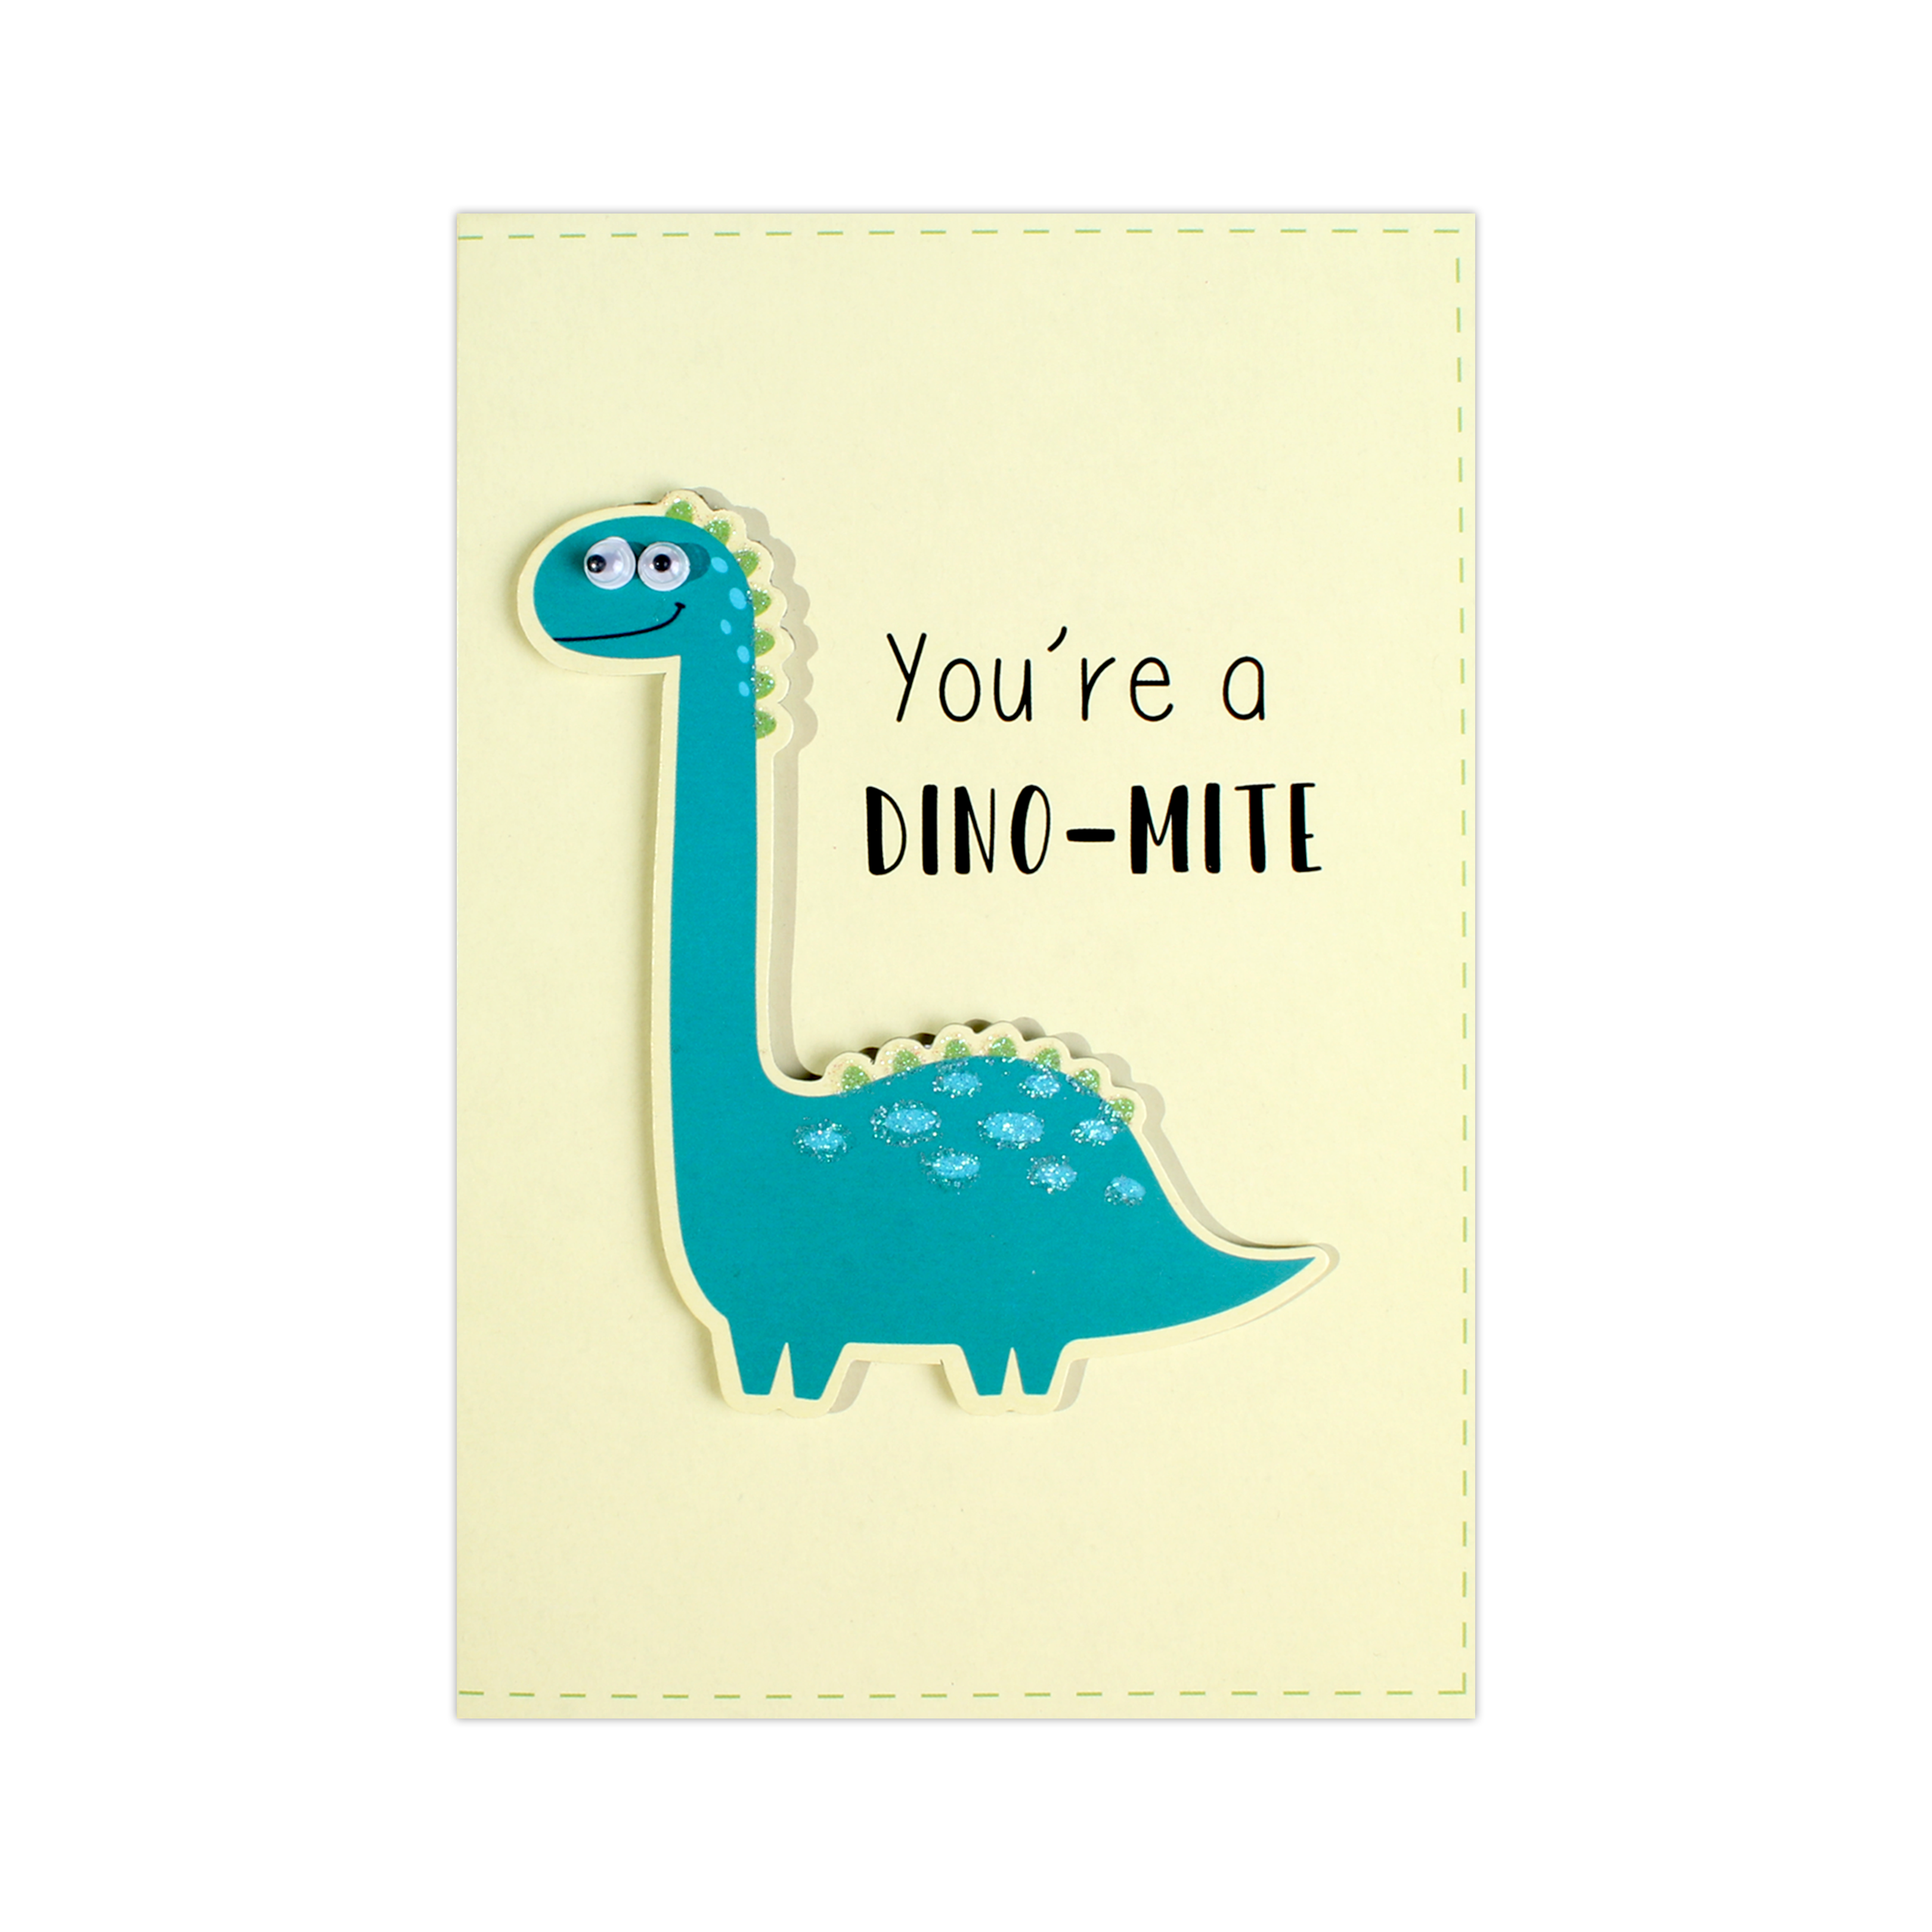 Greeting Card & Envelope You're a Dino-mite 4 X 6inch 2pc